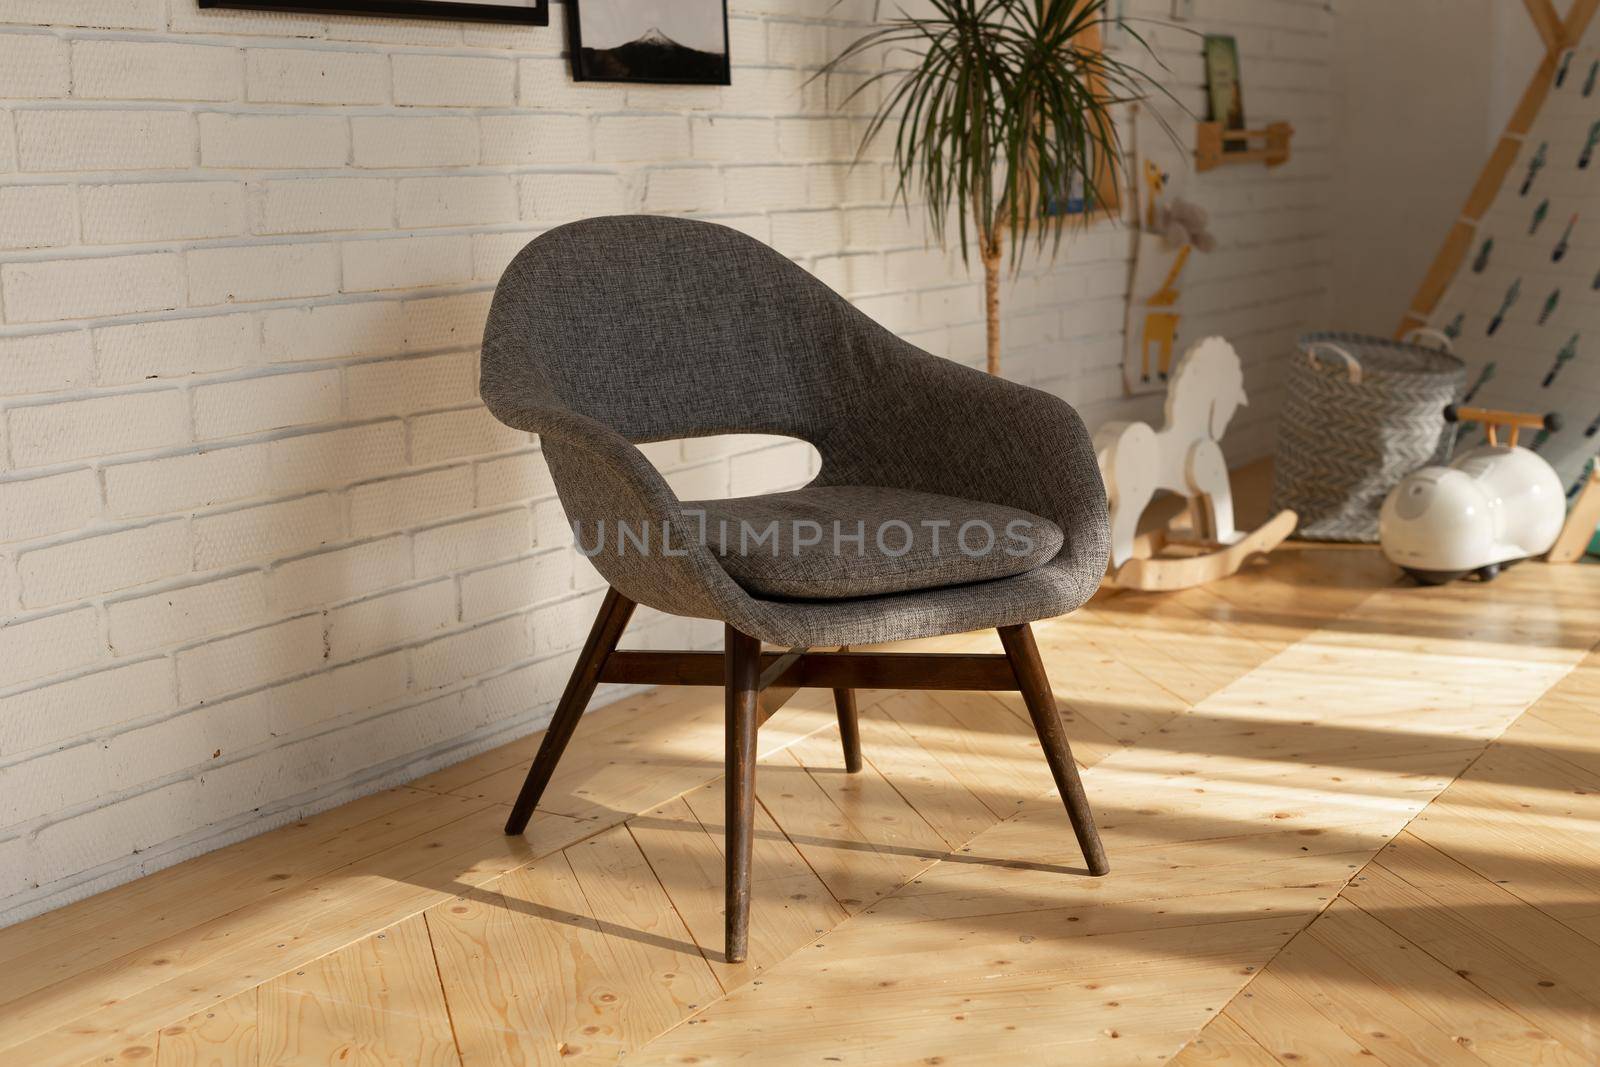 Cozy grey armchair and green plant in pot. Interior and furniture concept. by Satura86